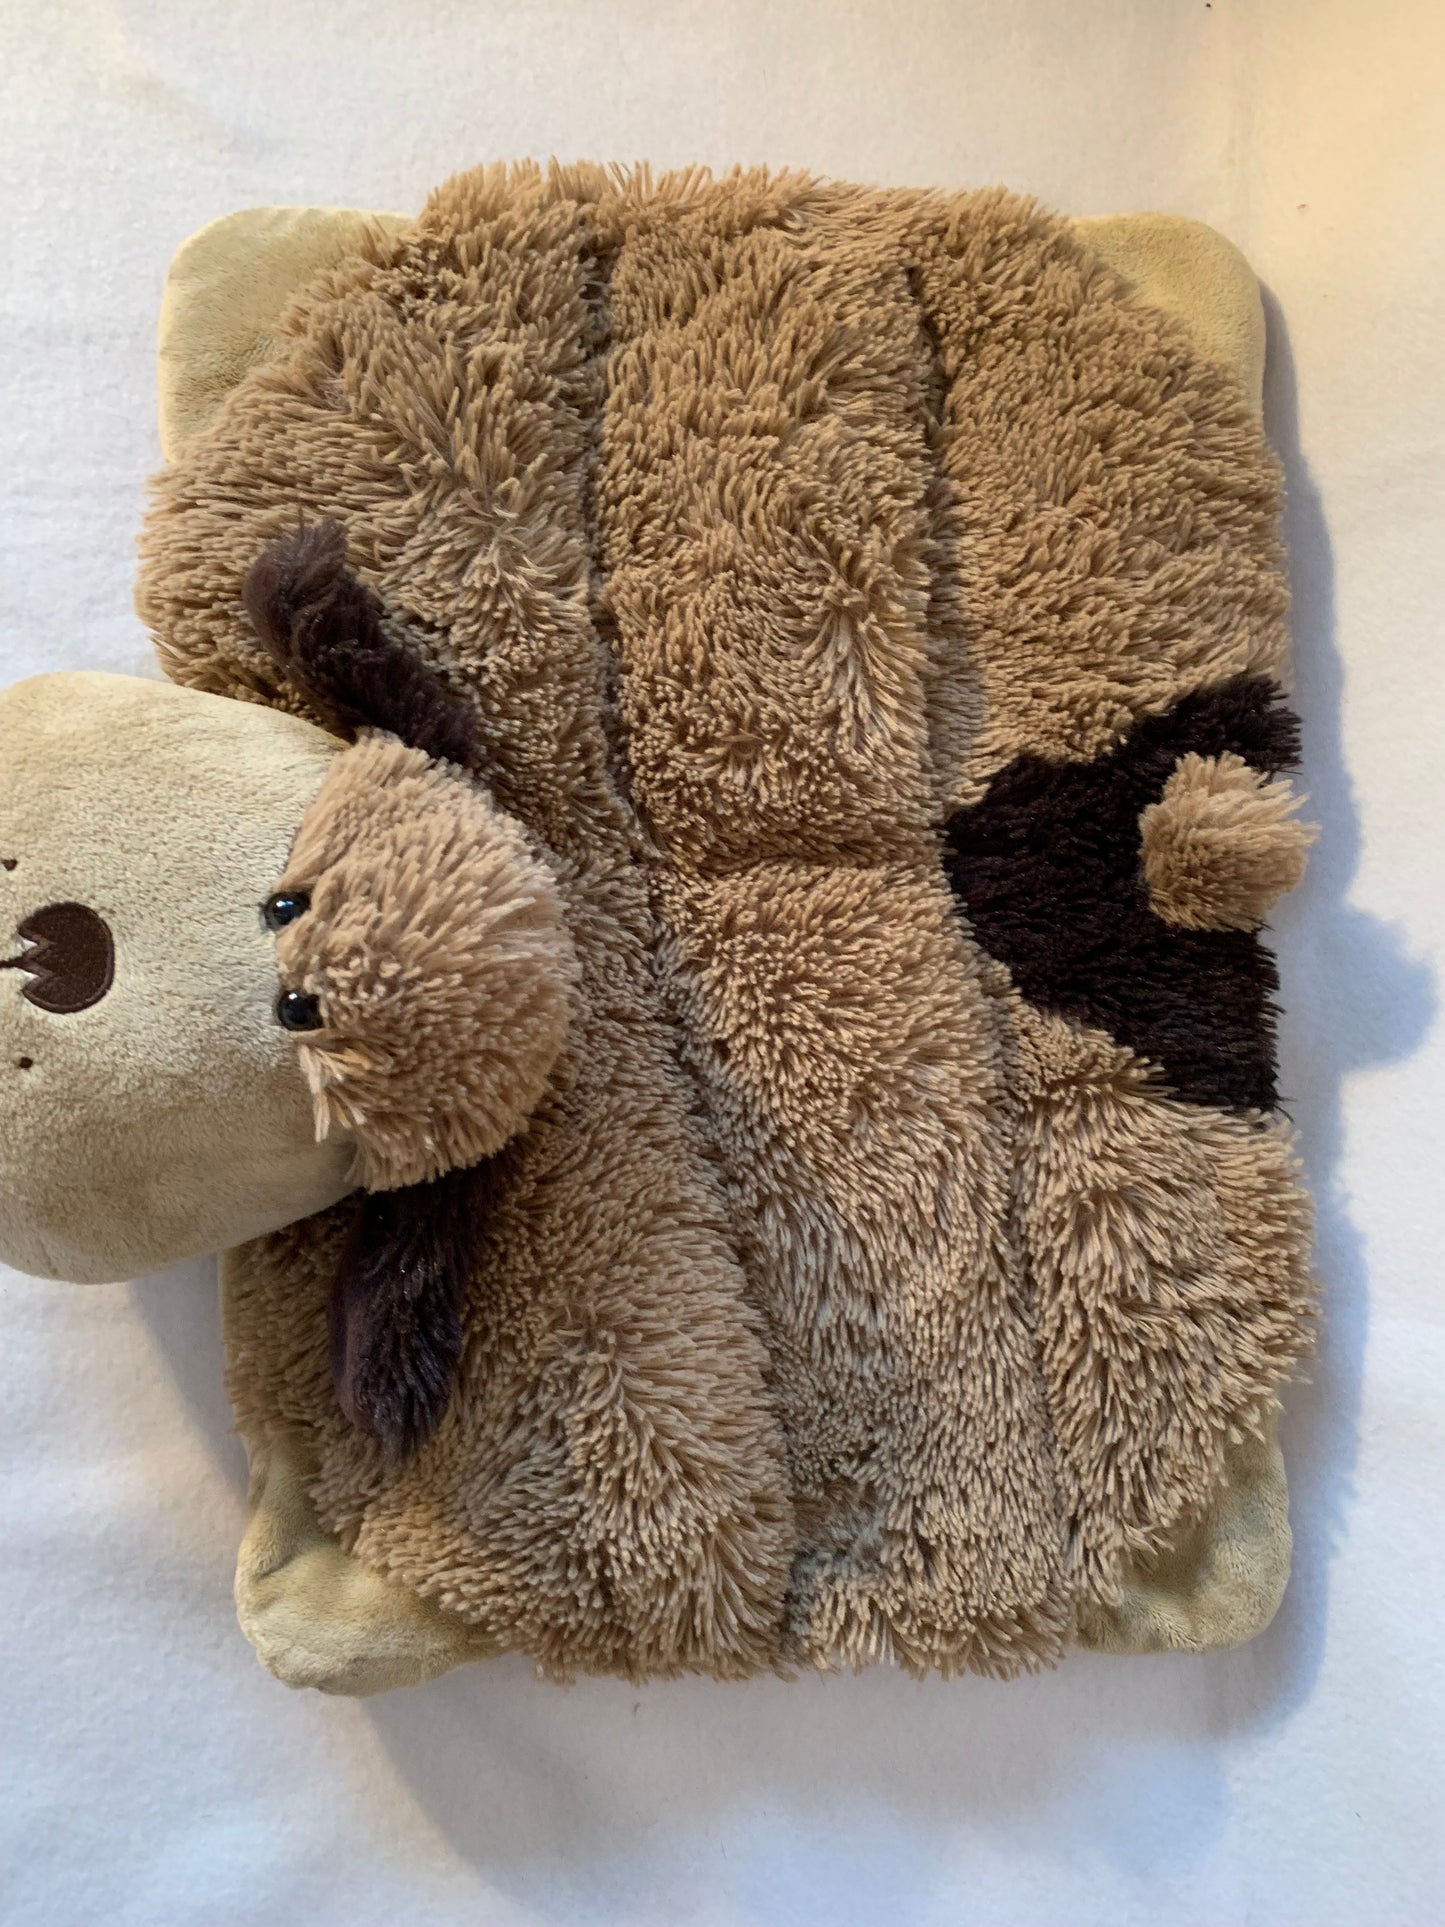 Weighted Lap Pad Pillow Pet with 5 lbs, SENSORY LAP PAD, leopard, octopus, unicorn, moose, bumble bee, cheetah or dog